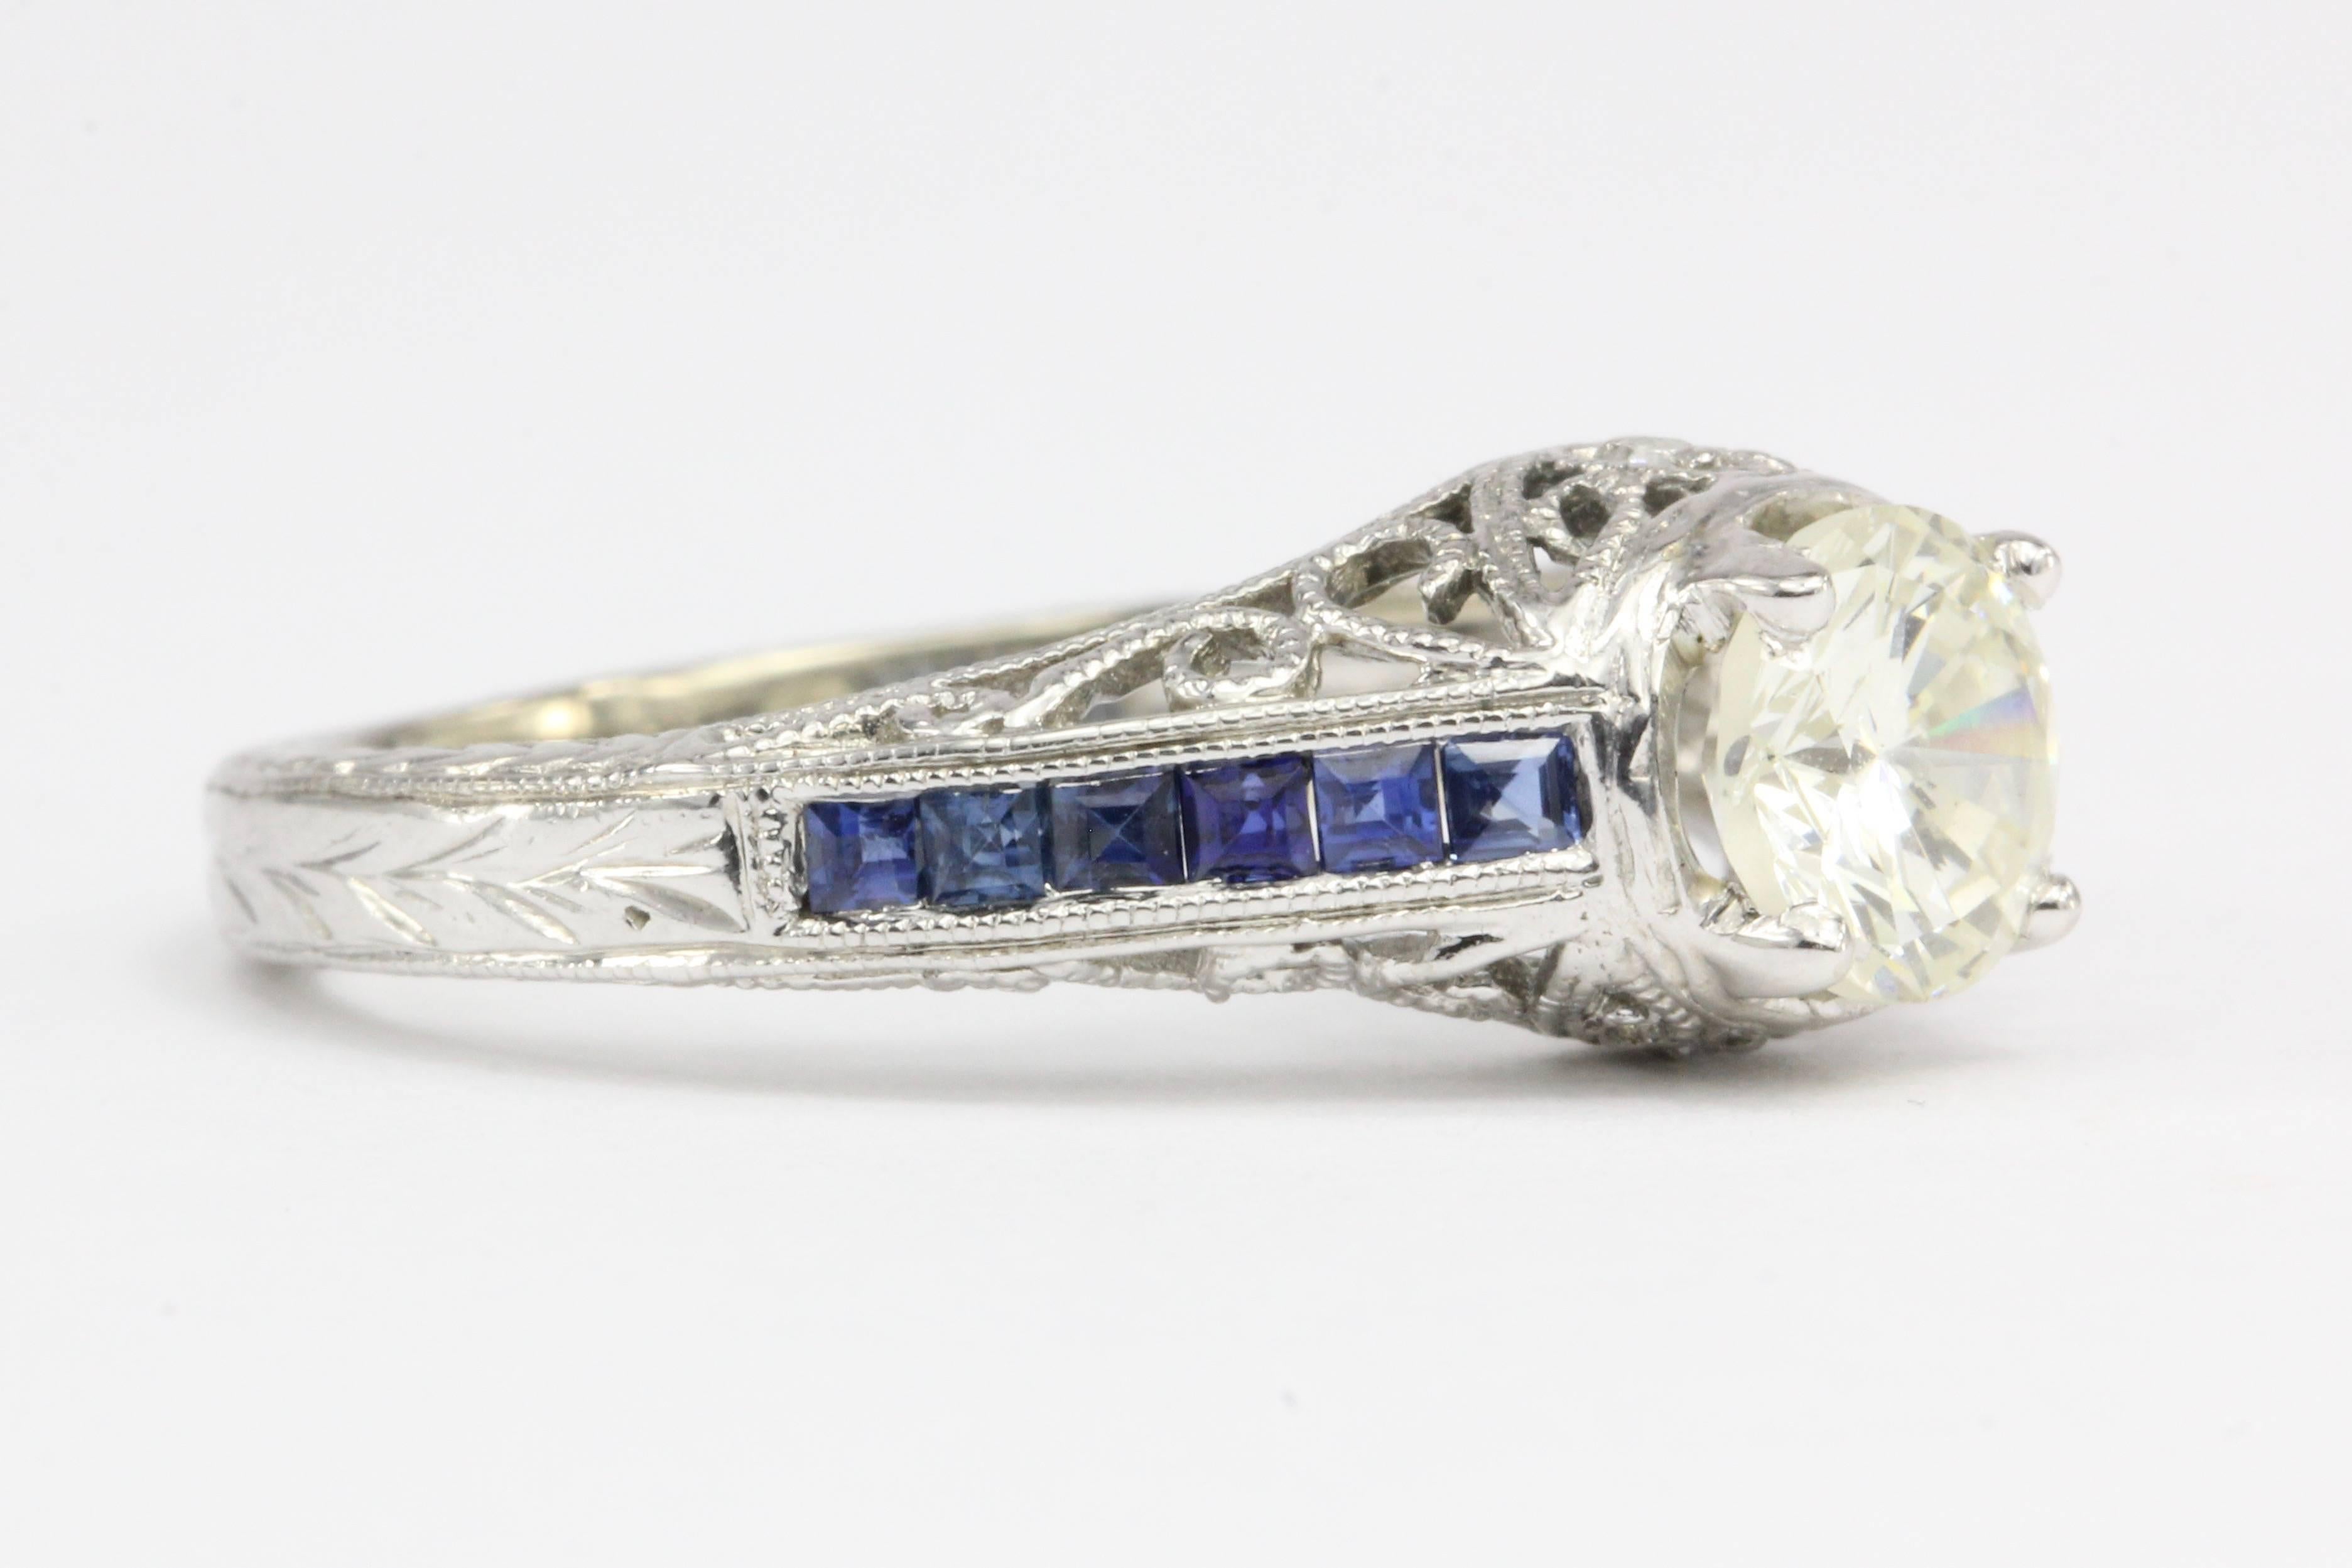 Era: Art Deco Style Modern 

Composition: 14K white gold

Primary Stone: Diamond

Stone Carat: 1 CT

Color: K/L

Clarity: Si2/I1

Secondary Stone: Natural Sapphire

Color: Blue

Carat Weight: .50 CTW

Ring Face: 5.7mm x 6.2mm wide

Ring Size: